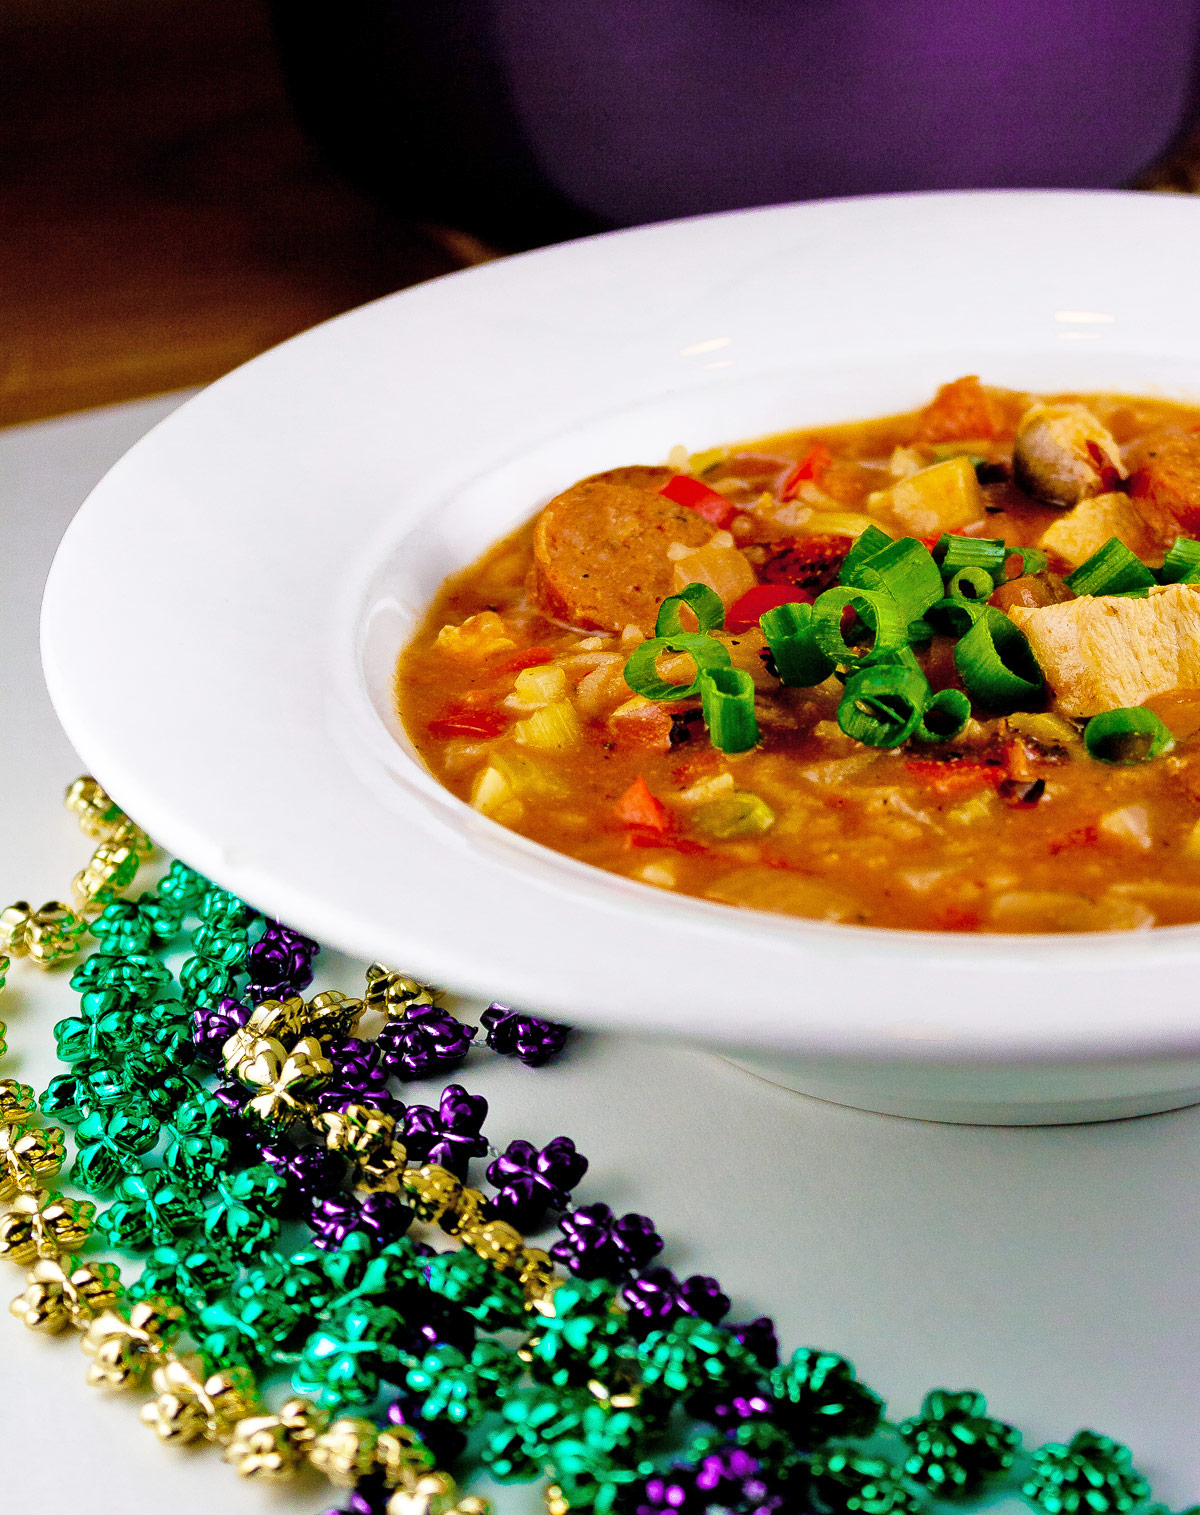 Hearty stew with chicken and sausage, flavored with creole seasonings and lots of vegetables, decorated with Mardi Gras beads alongside; Chicken Sausage Gumbo © 2023 Jane Bonacci, The Heritage Cook.